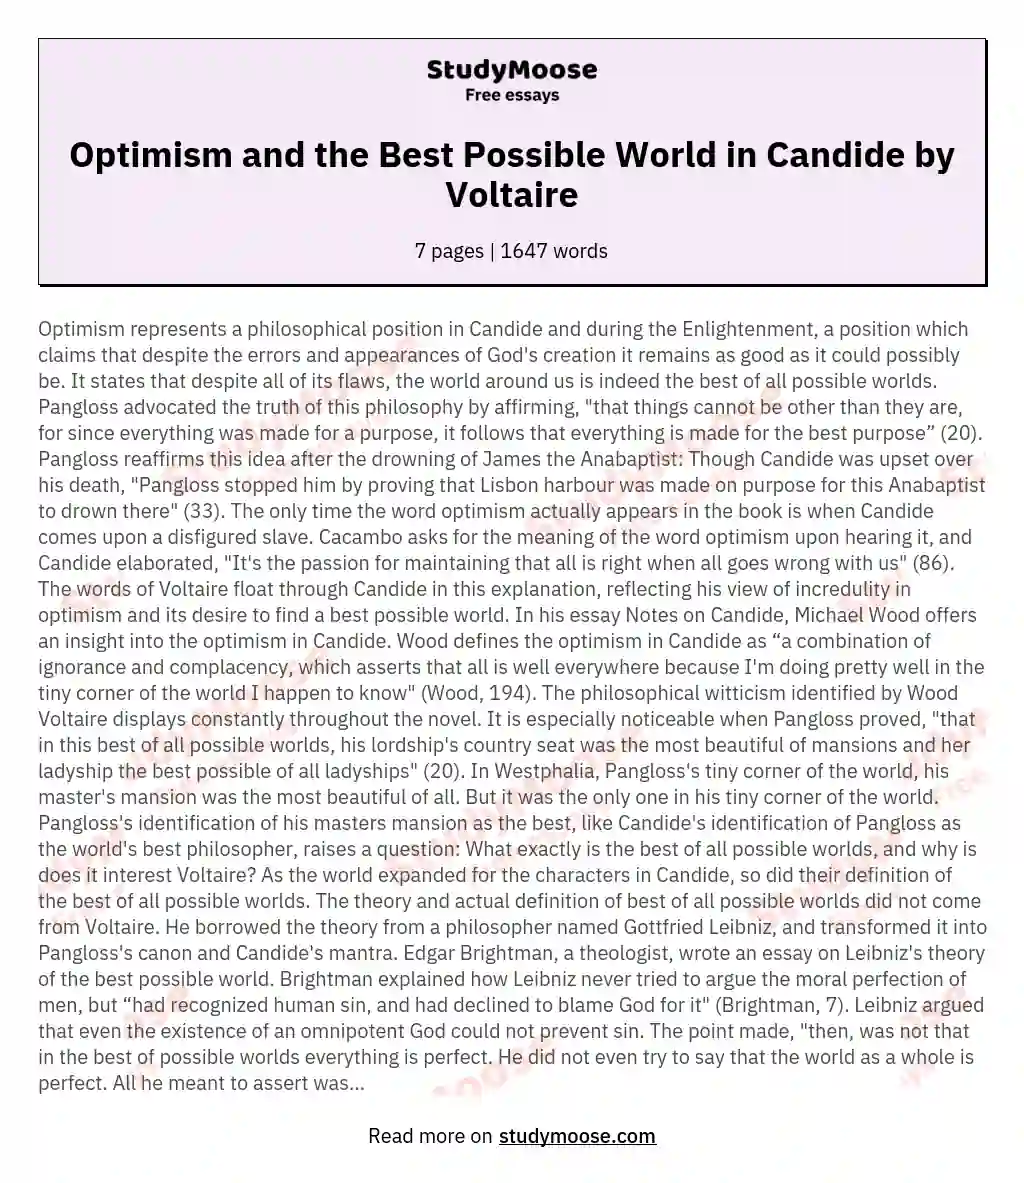 Optimism and the Best Possible World in Candide by Voltaire essay